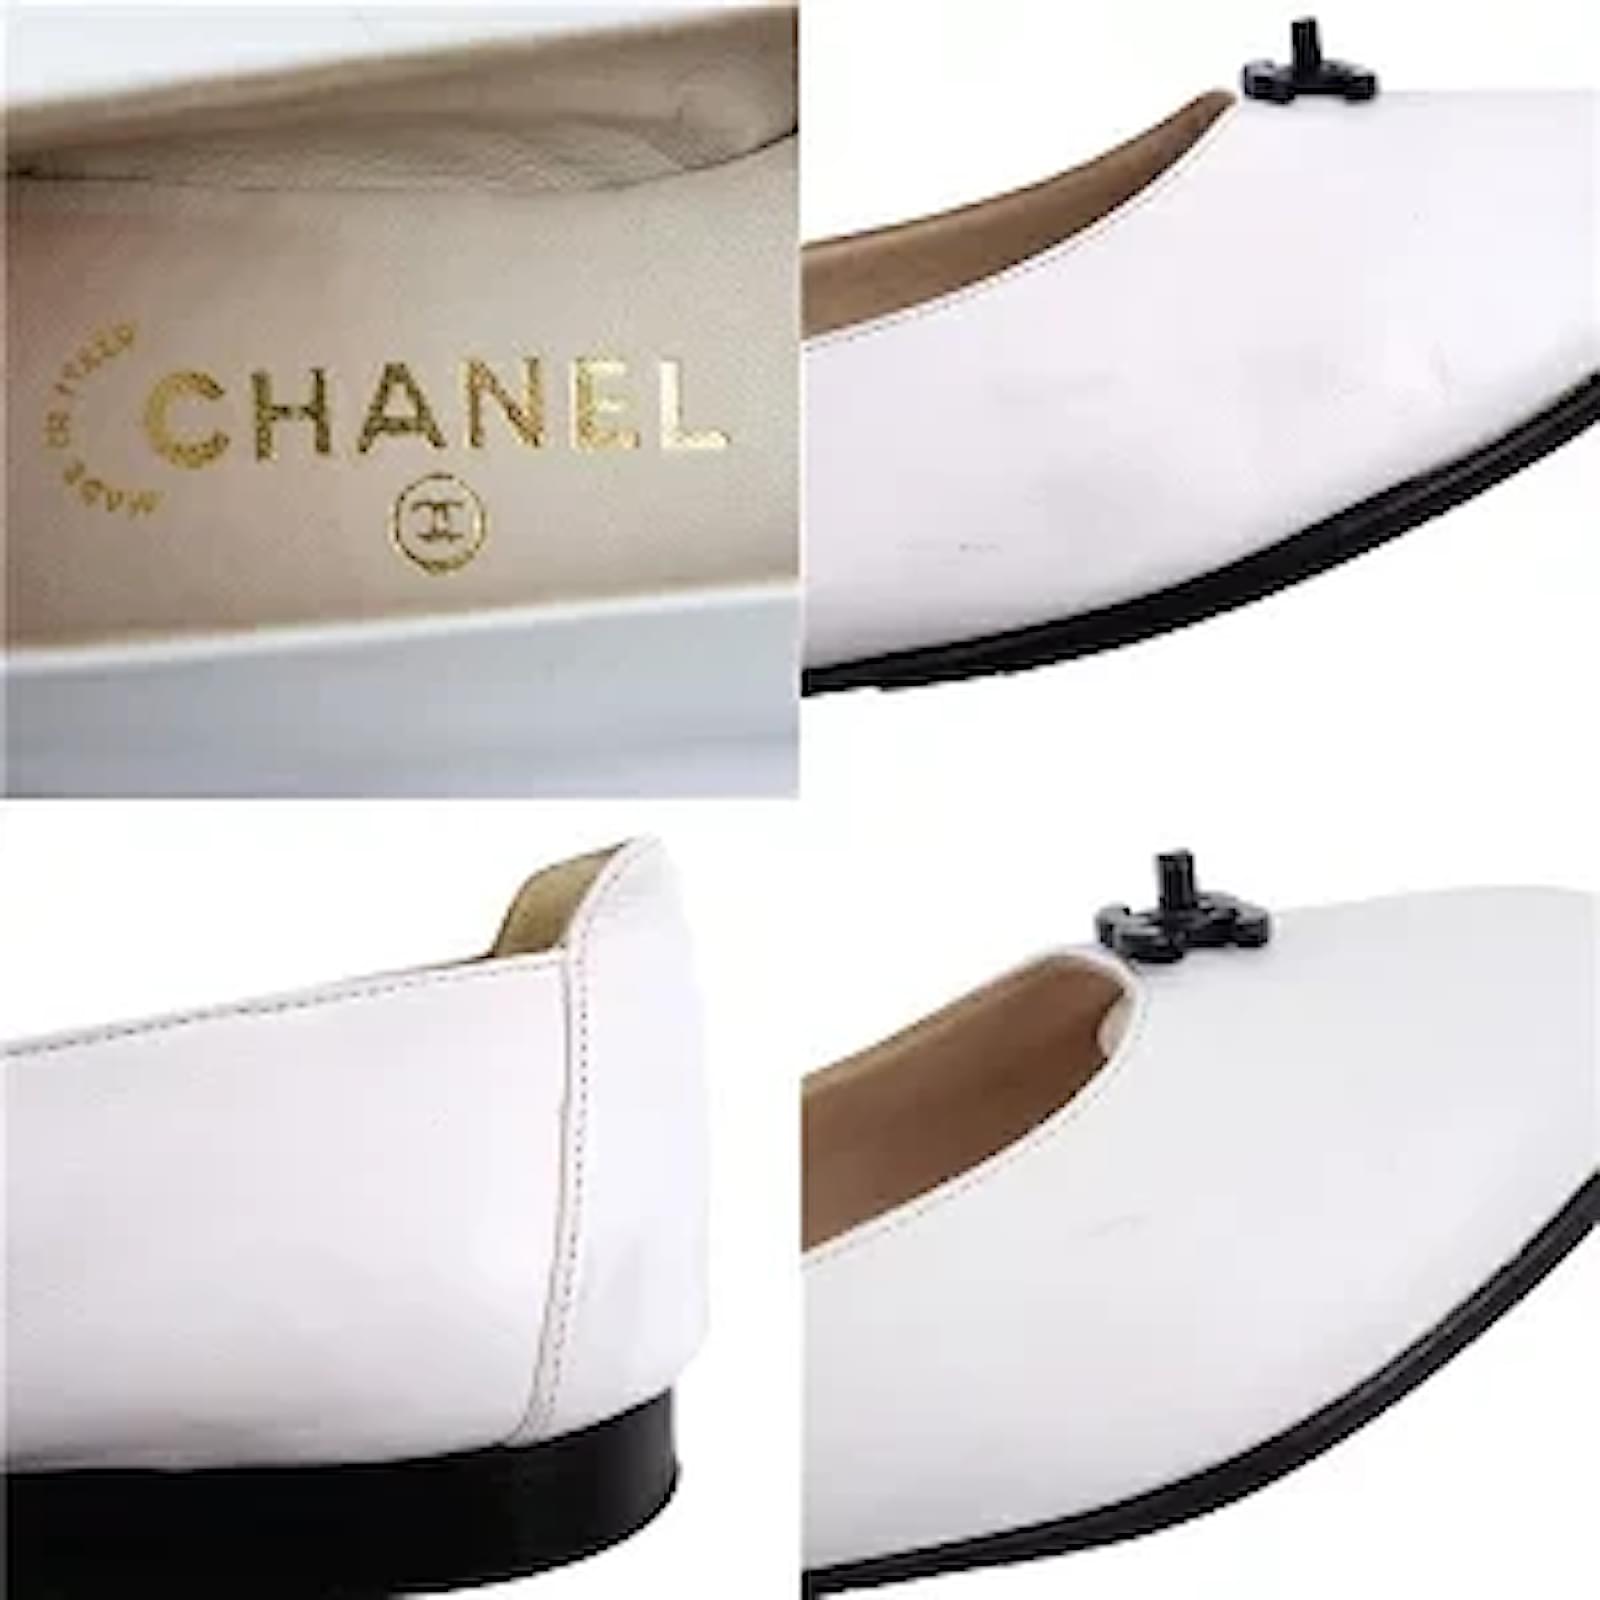 Used) Vintage Chanel CHANEL Coco Mark Turn Lock Flat Pumps 35 1/2 Leather  Shoes Shoes Women's White Women's Shoes ref.353664 - Joli Closet